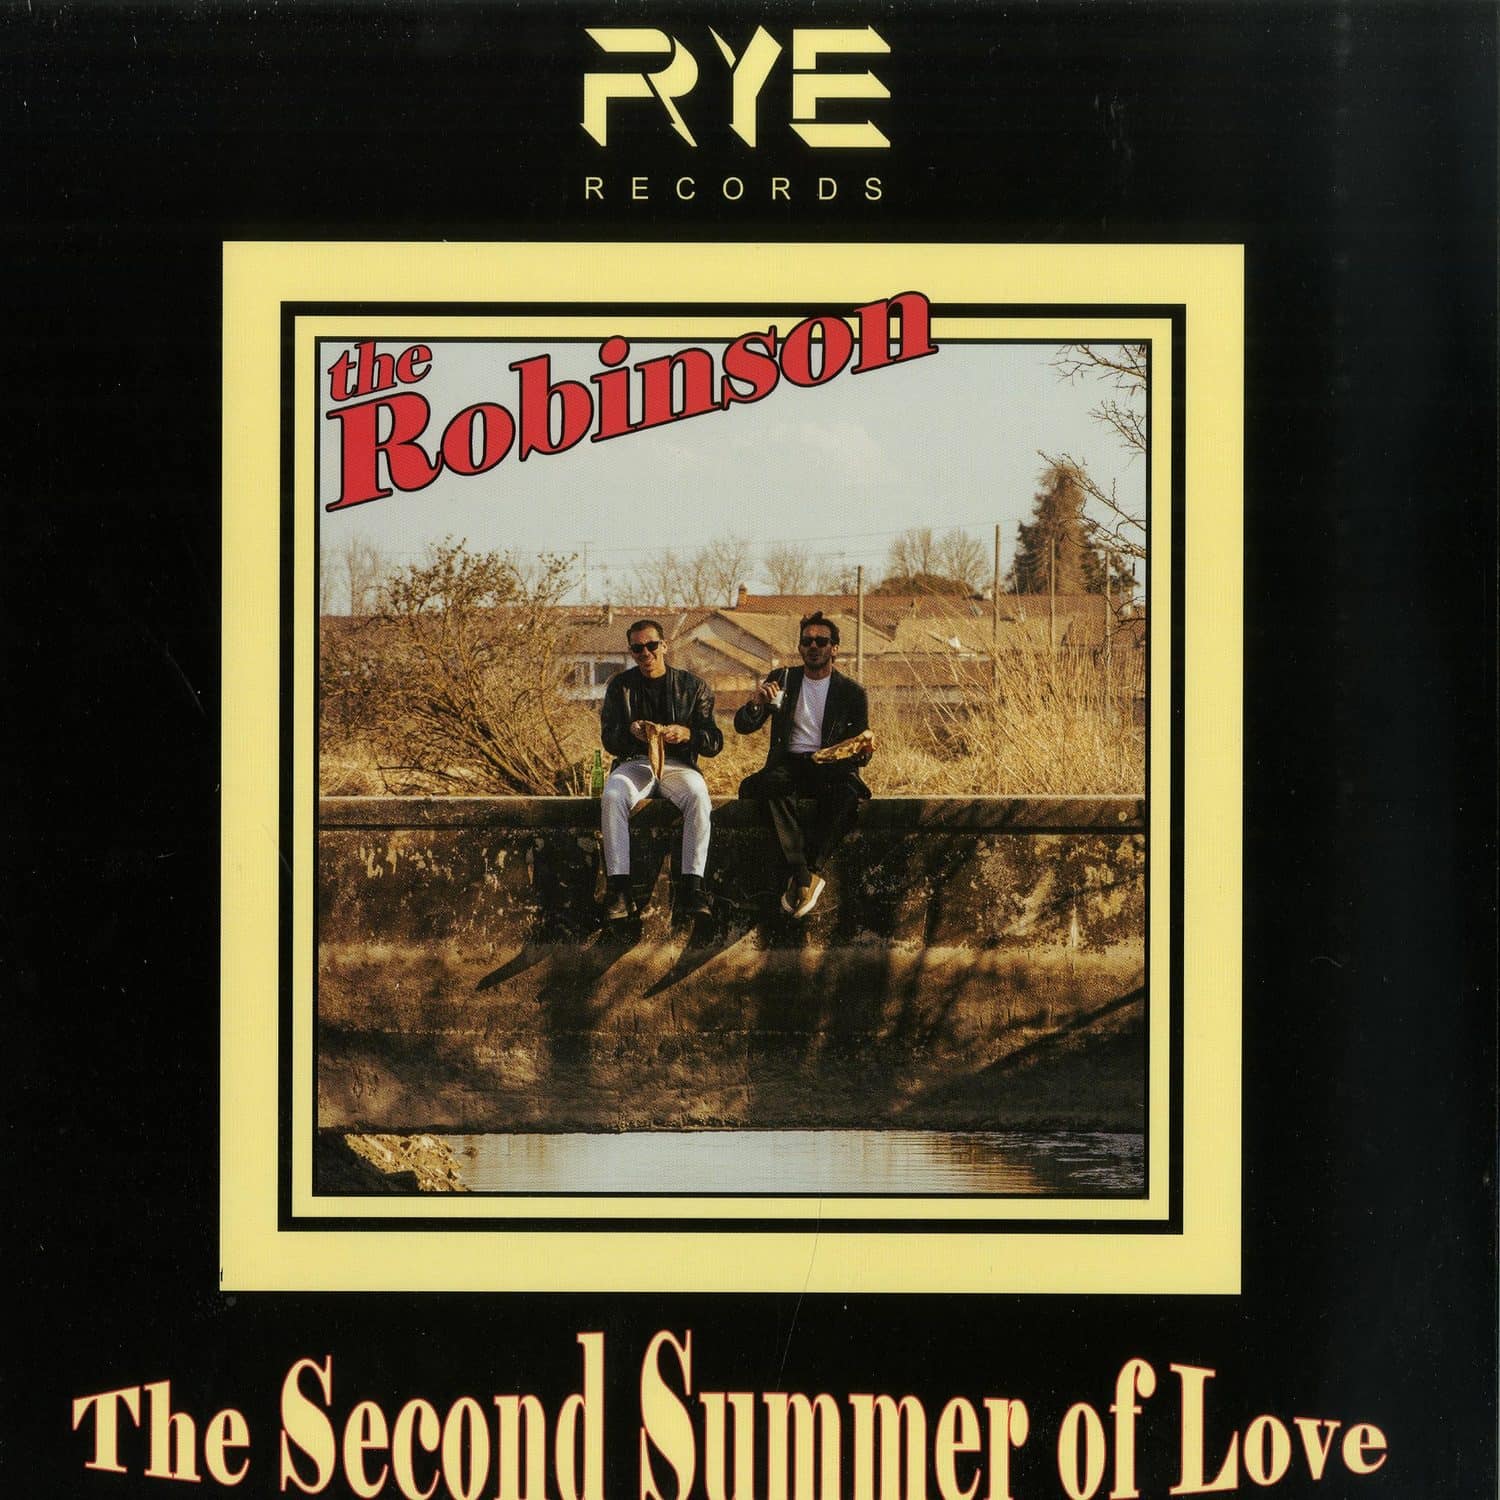 The Robinson - THE SECOND SUMMER OF LOVE